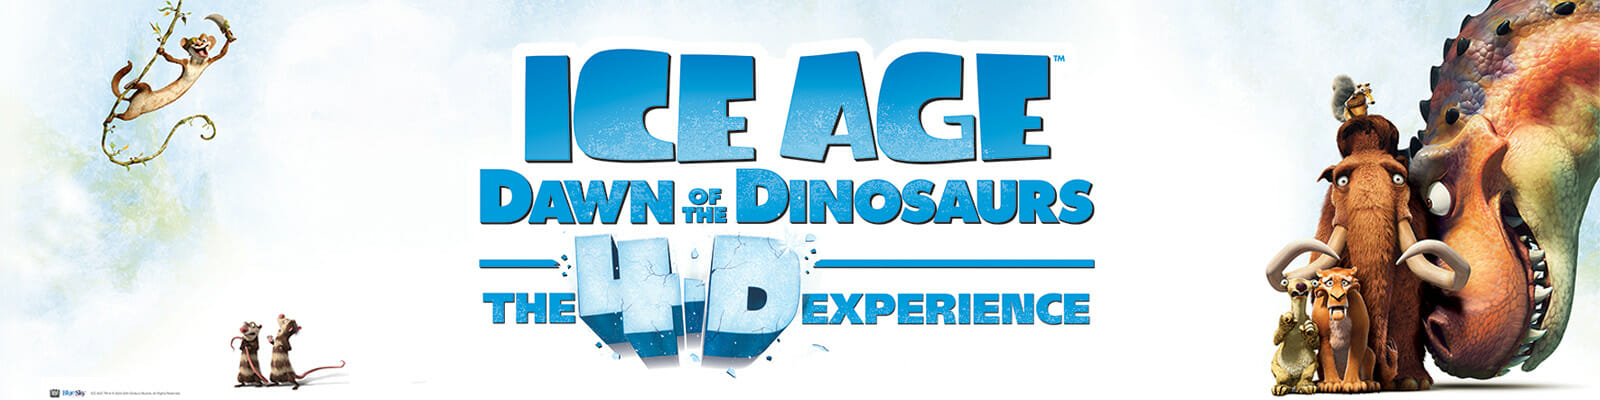 Ice Age: Dawn of the Dinosaurs - The 4D Experience